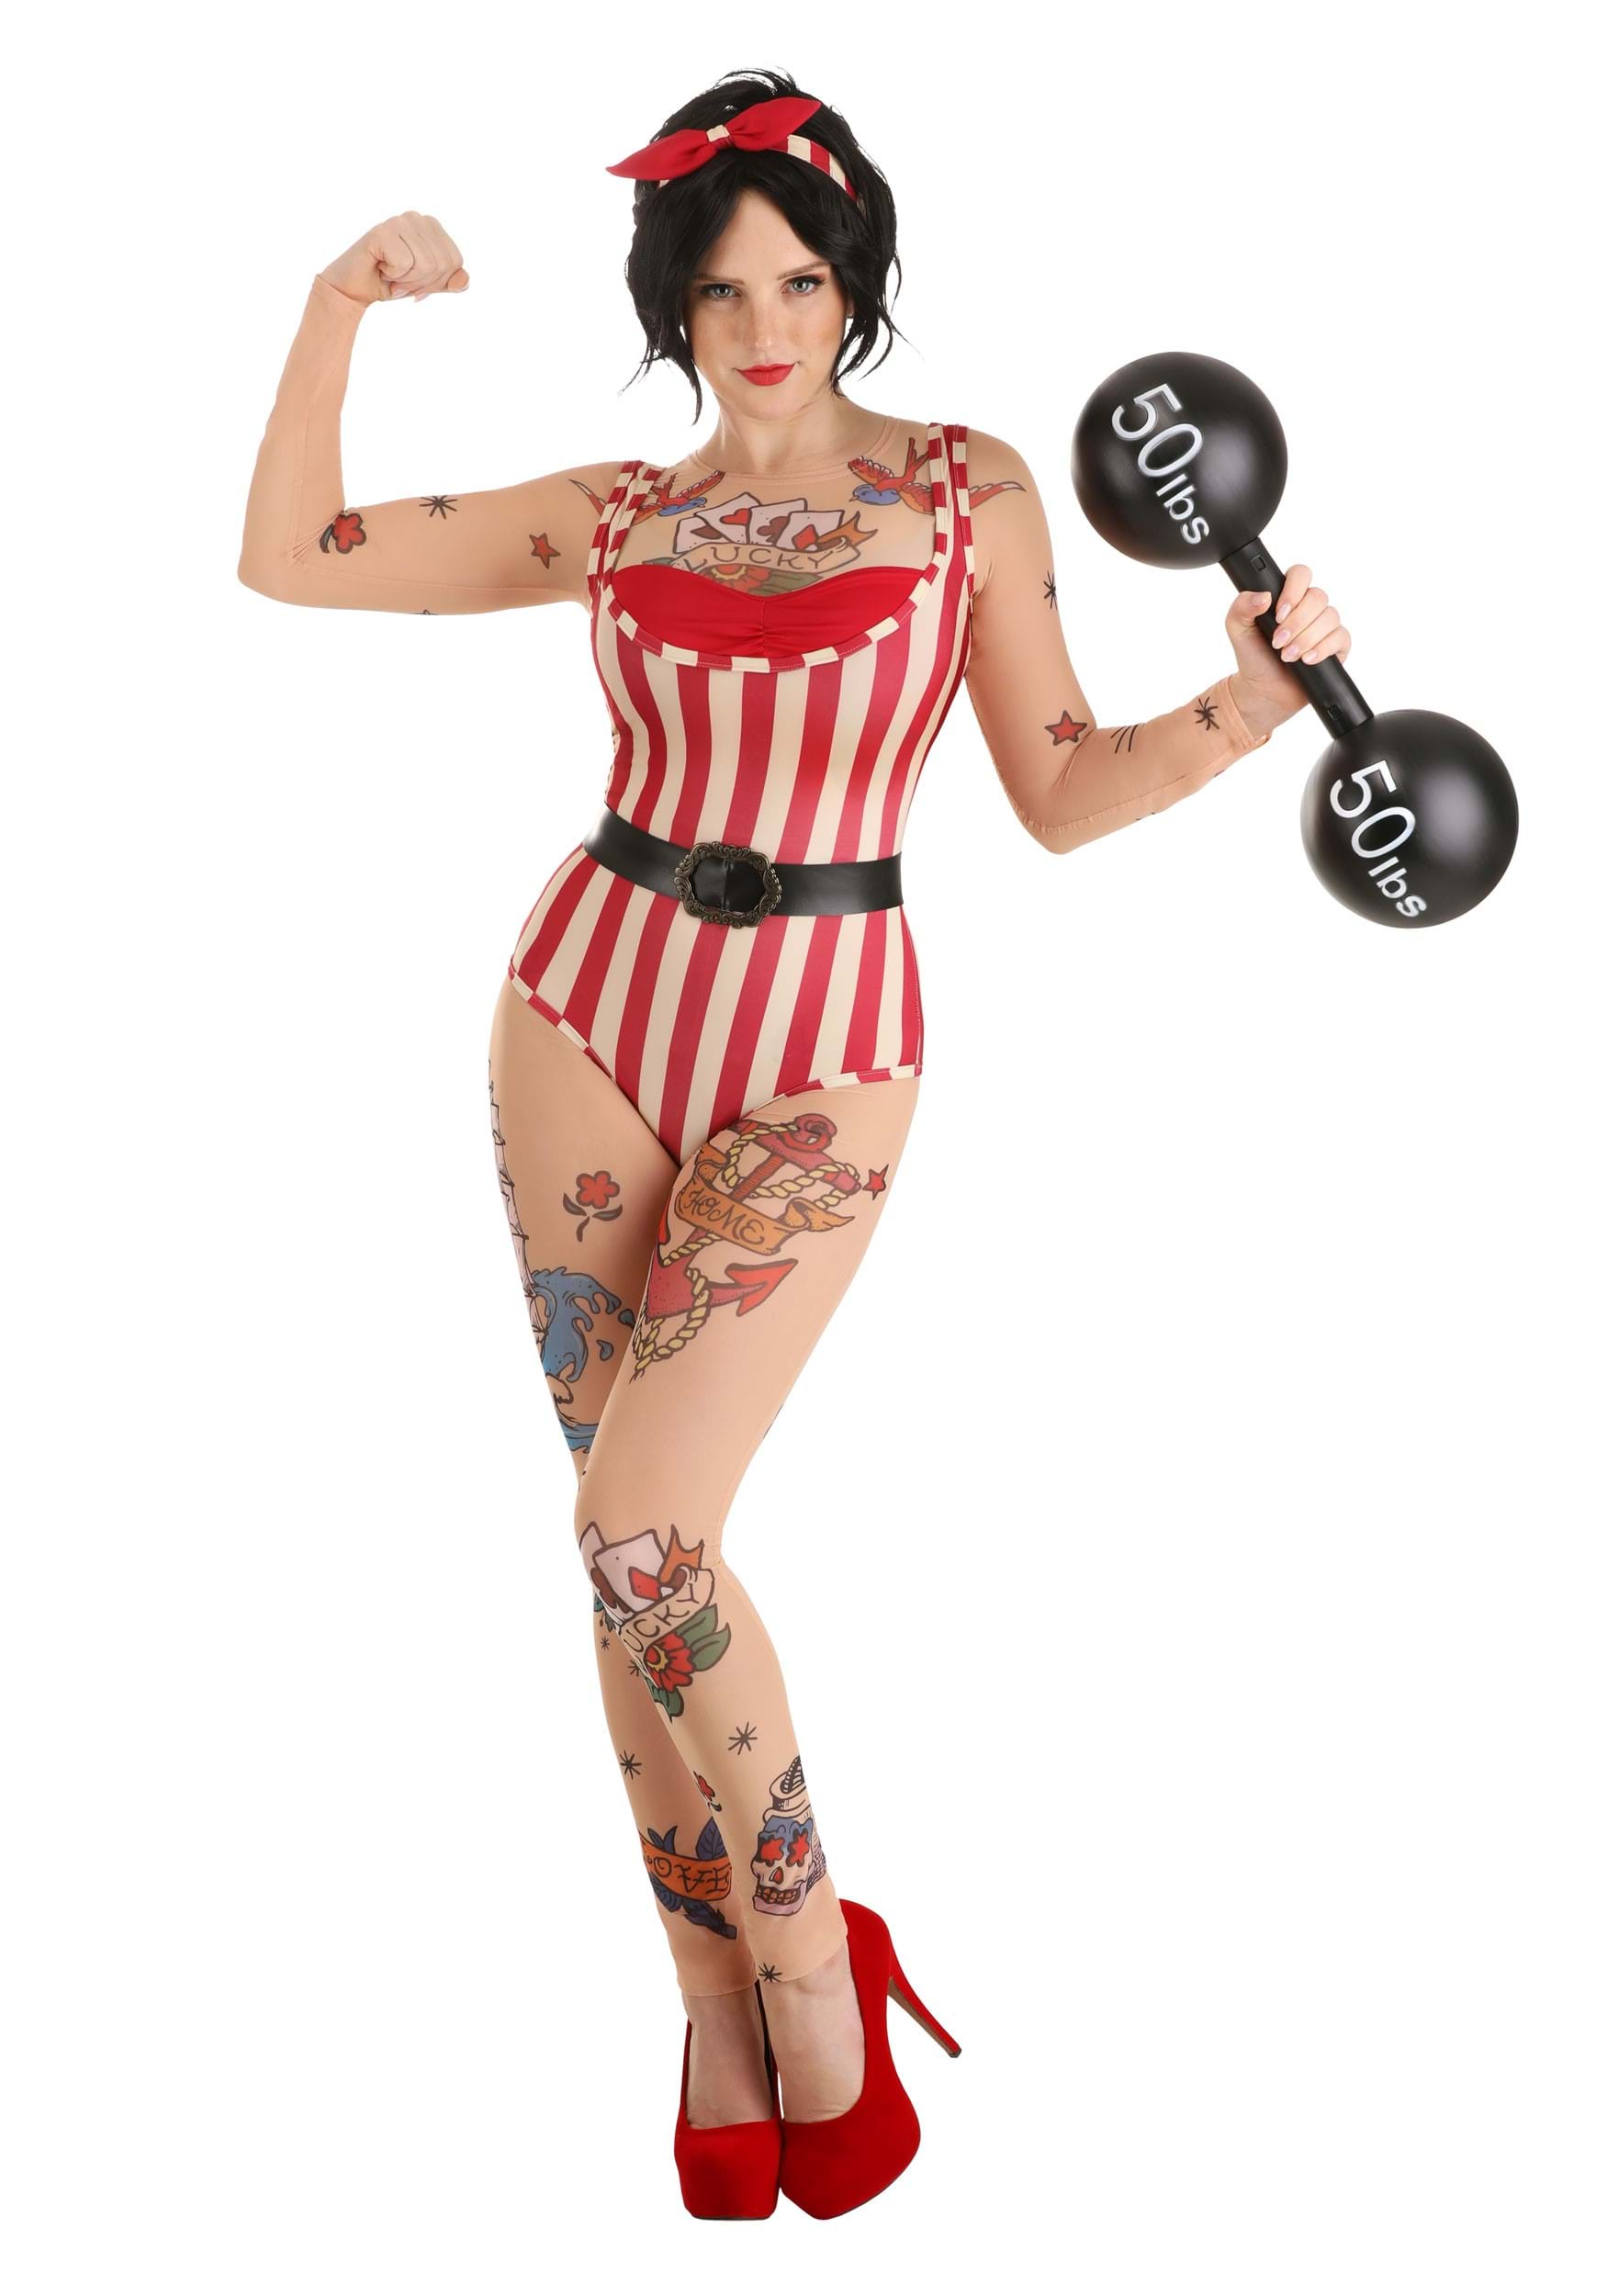 https://images.halloweencostumes.com/products/61218/1-1/womens-vintage-strong-woman-costume.jpg